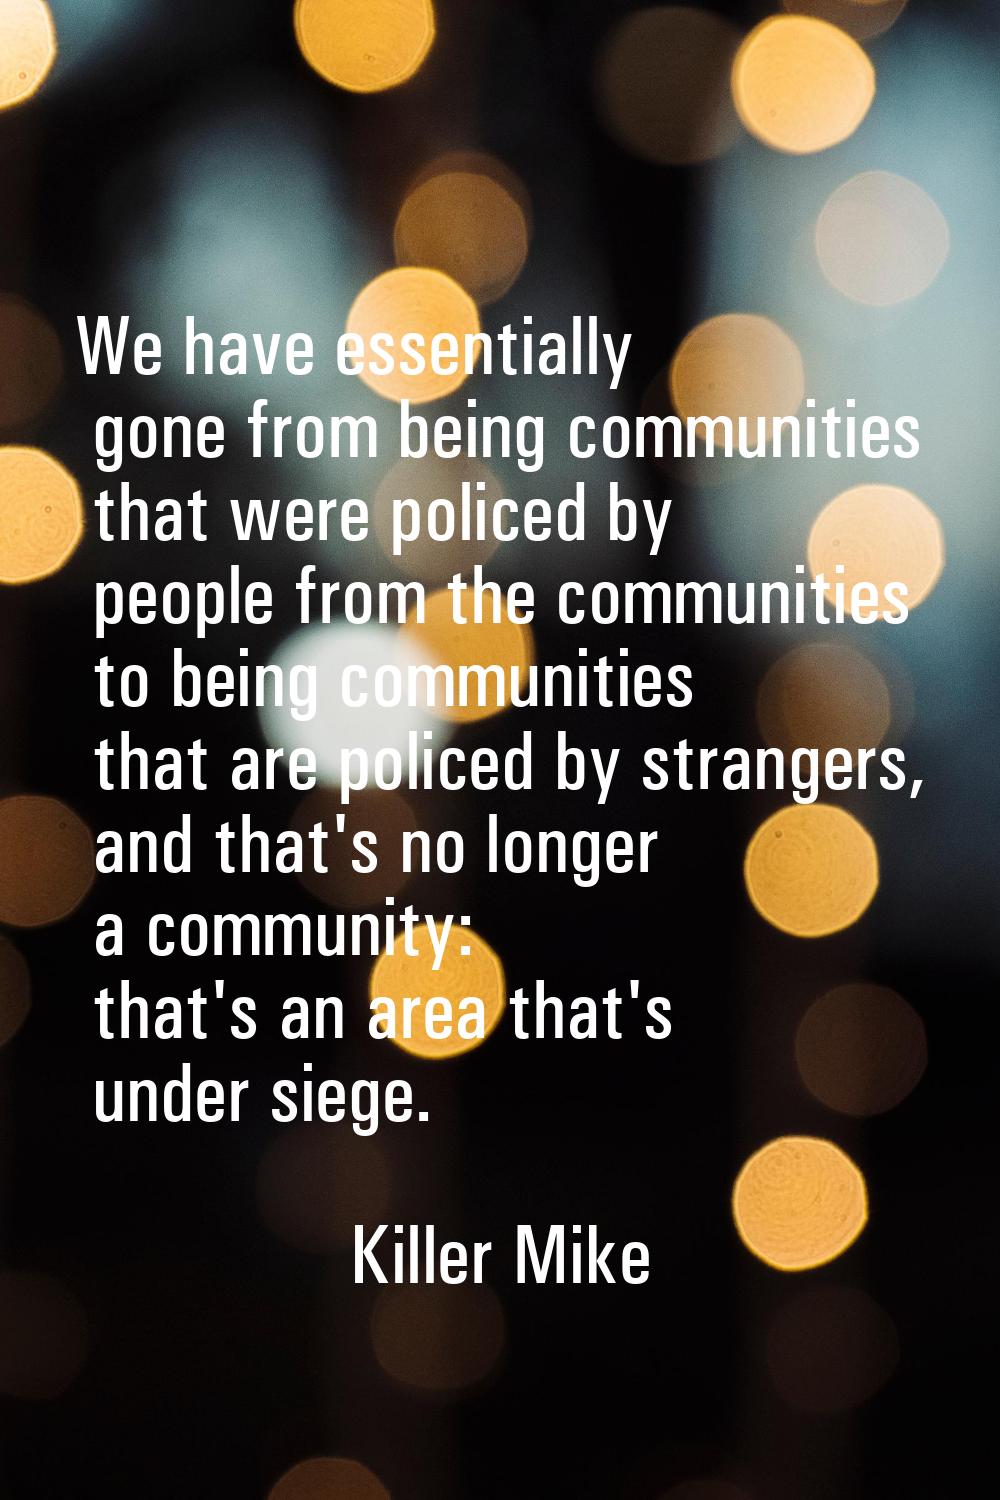 We have essentially gone from being communities that were policed by people from the communities to